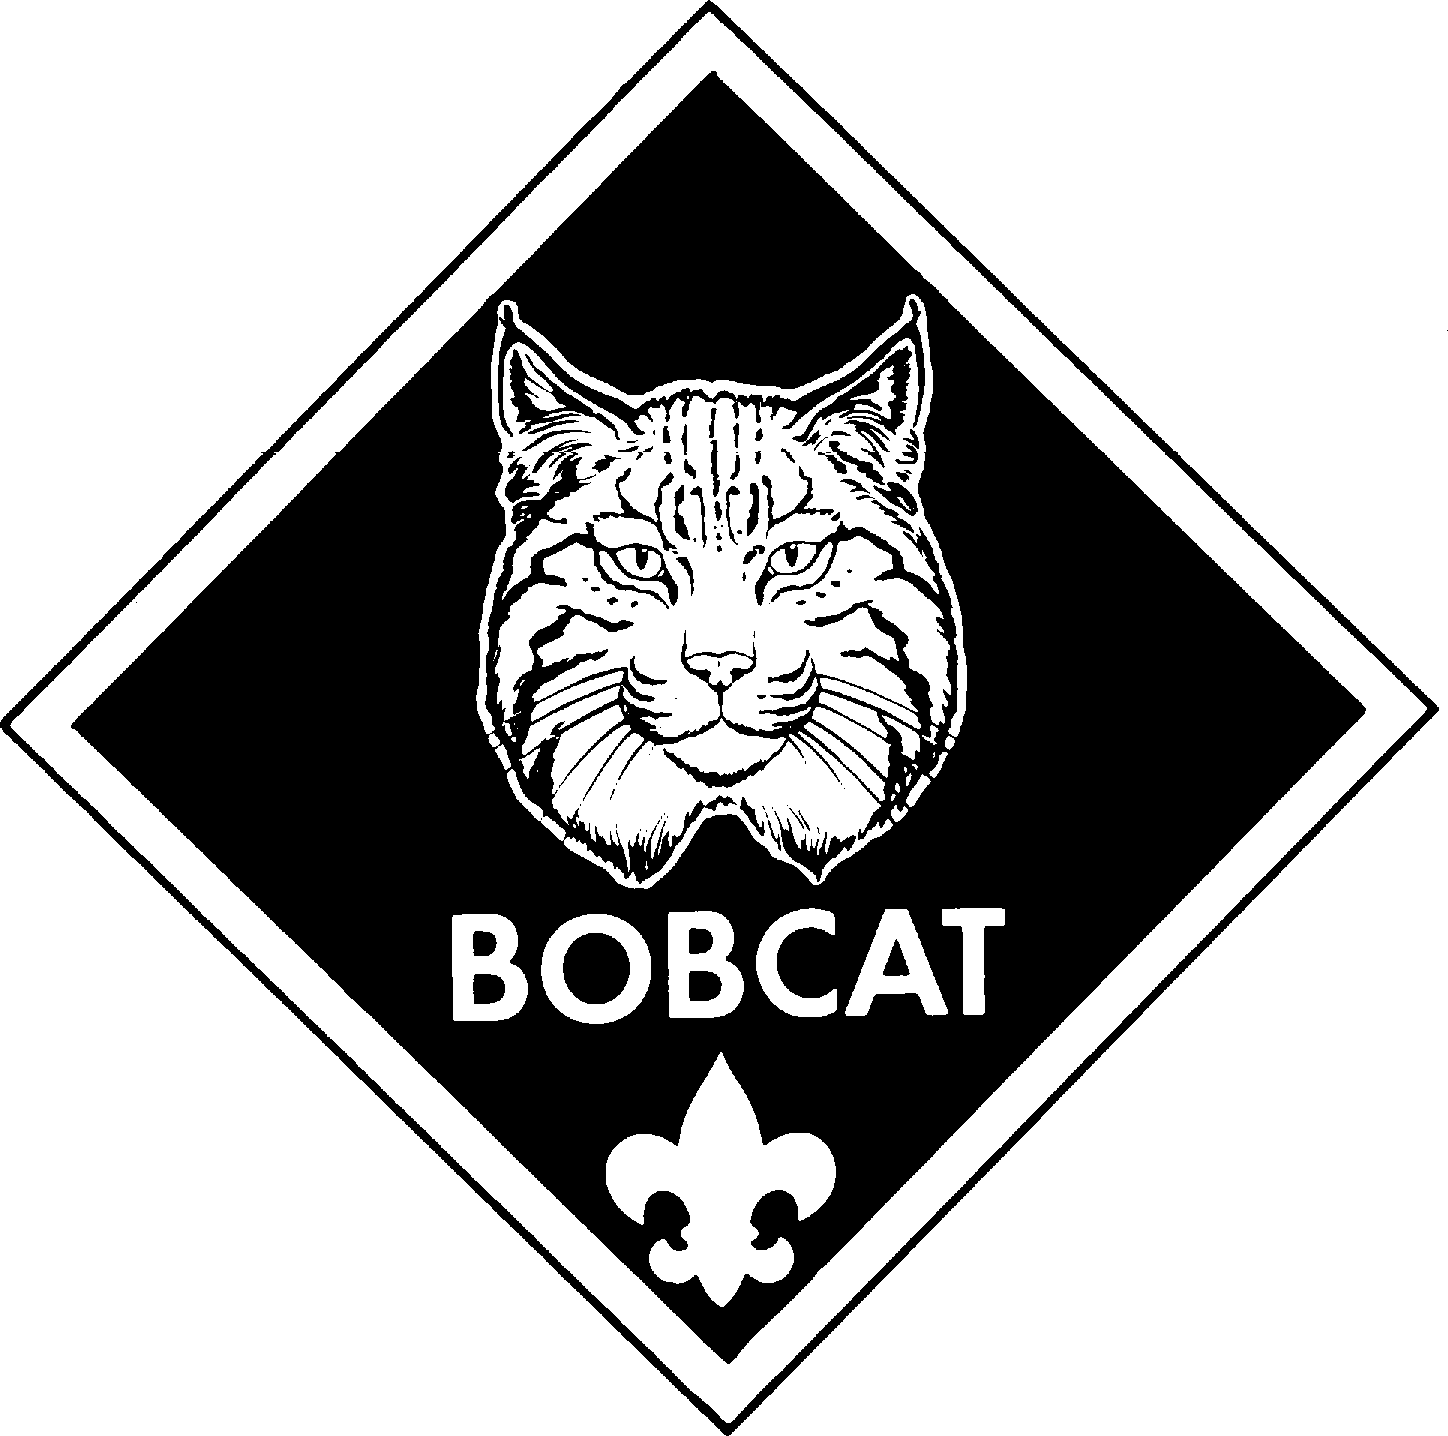 Bobcat clipart cub scout. Usssp library images in